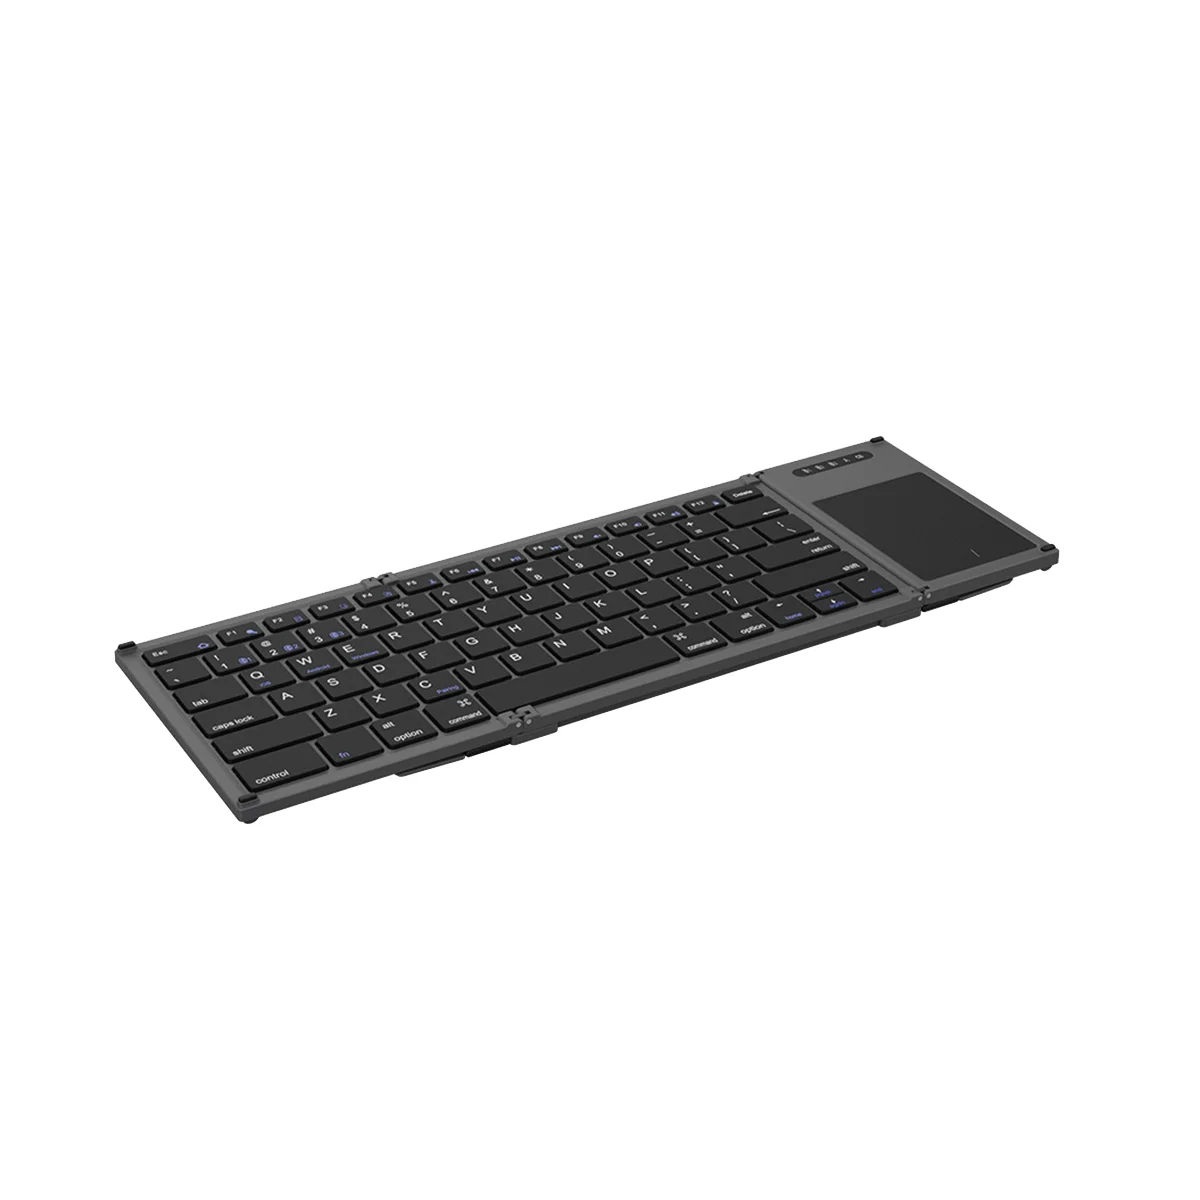 

Wireless Folding Keyboard Bluetooth 78 Keys Touchpad Keypad Rechargeable for IOS, Android, Windows PC Laptop Tablet